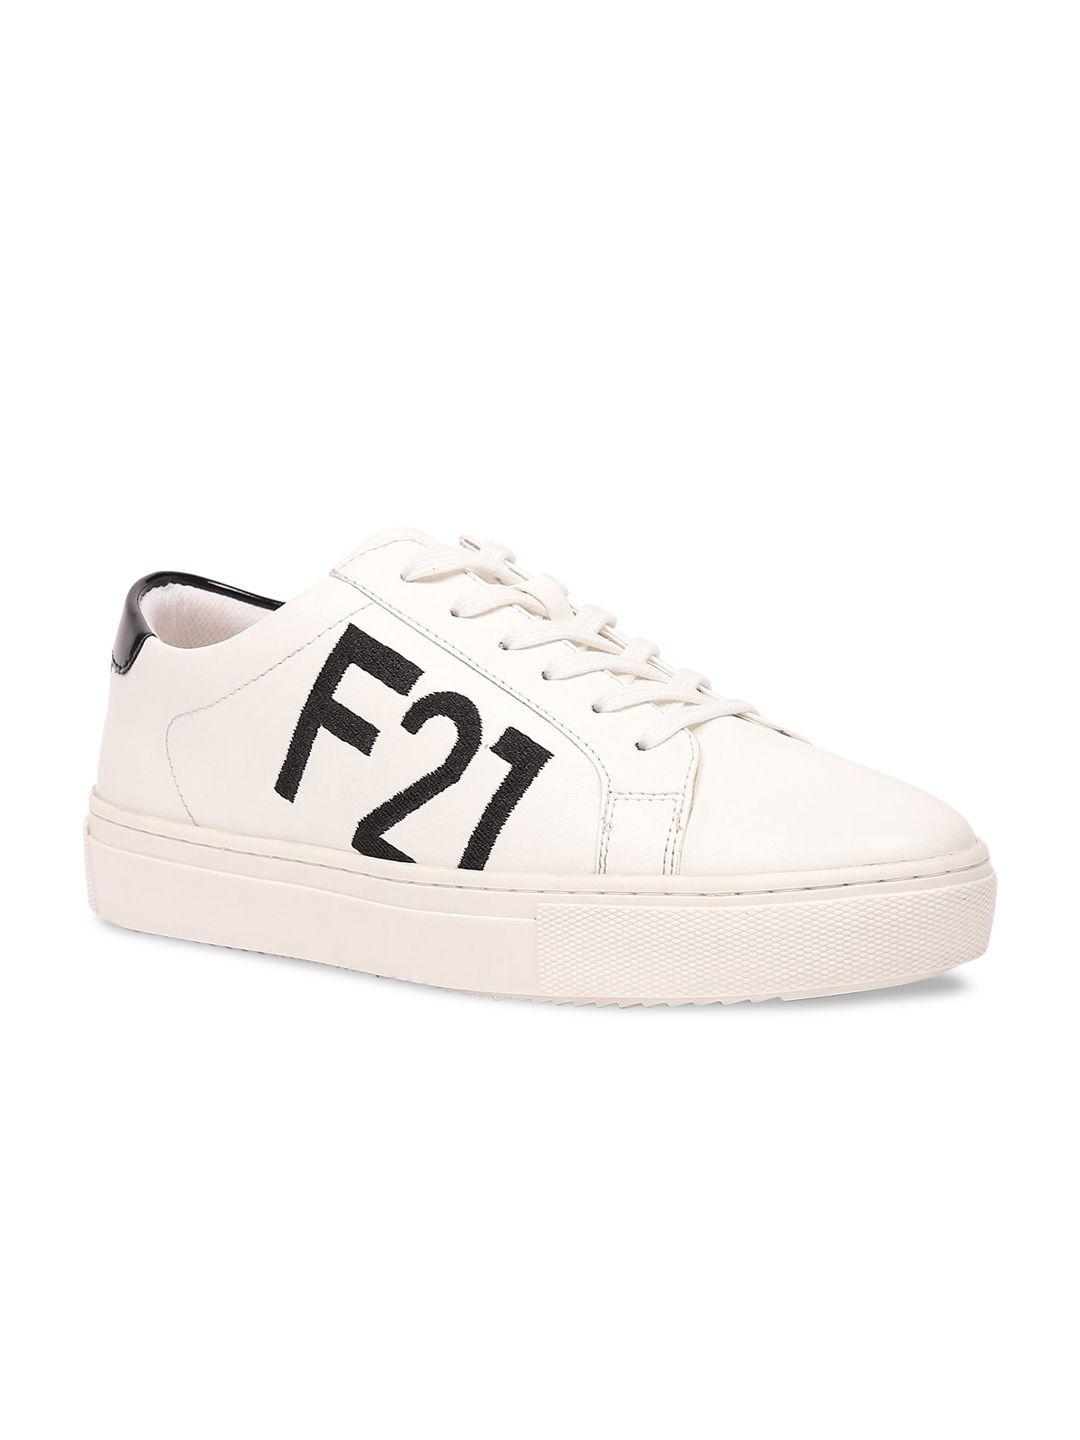 forever-21-women-white-pu-sneakers